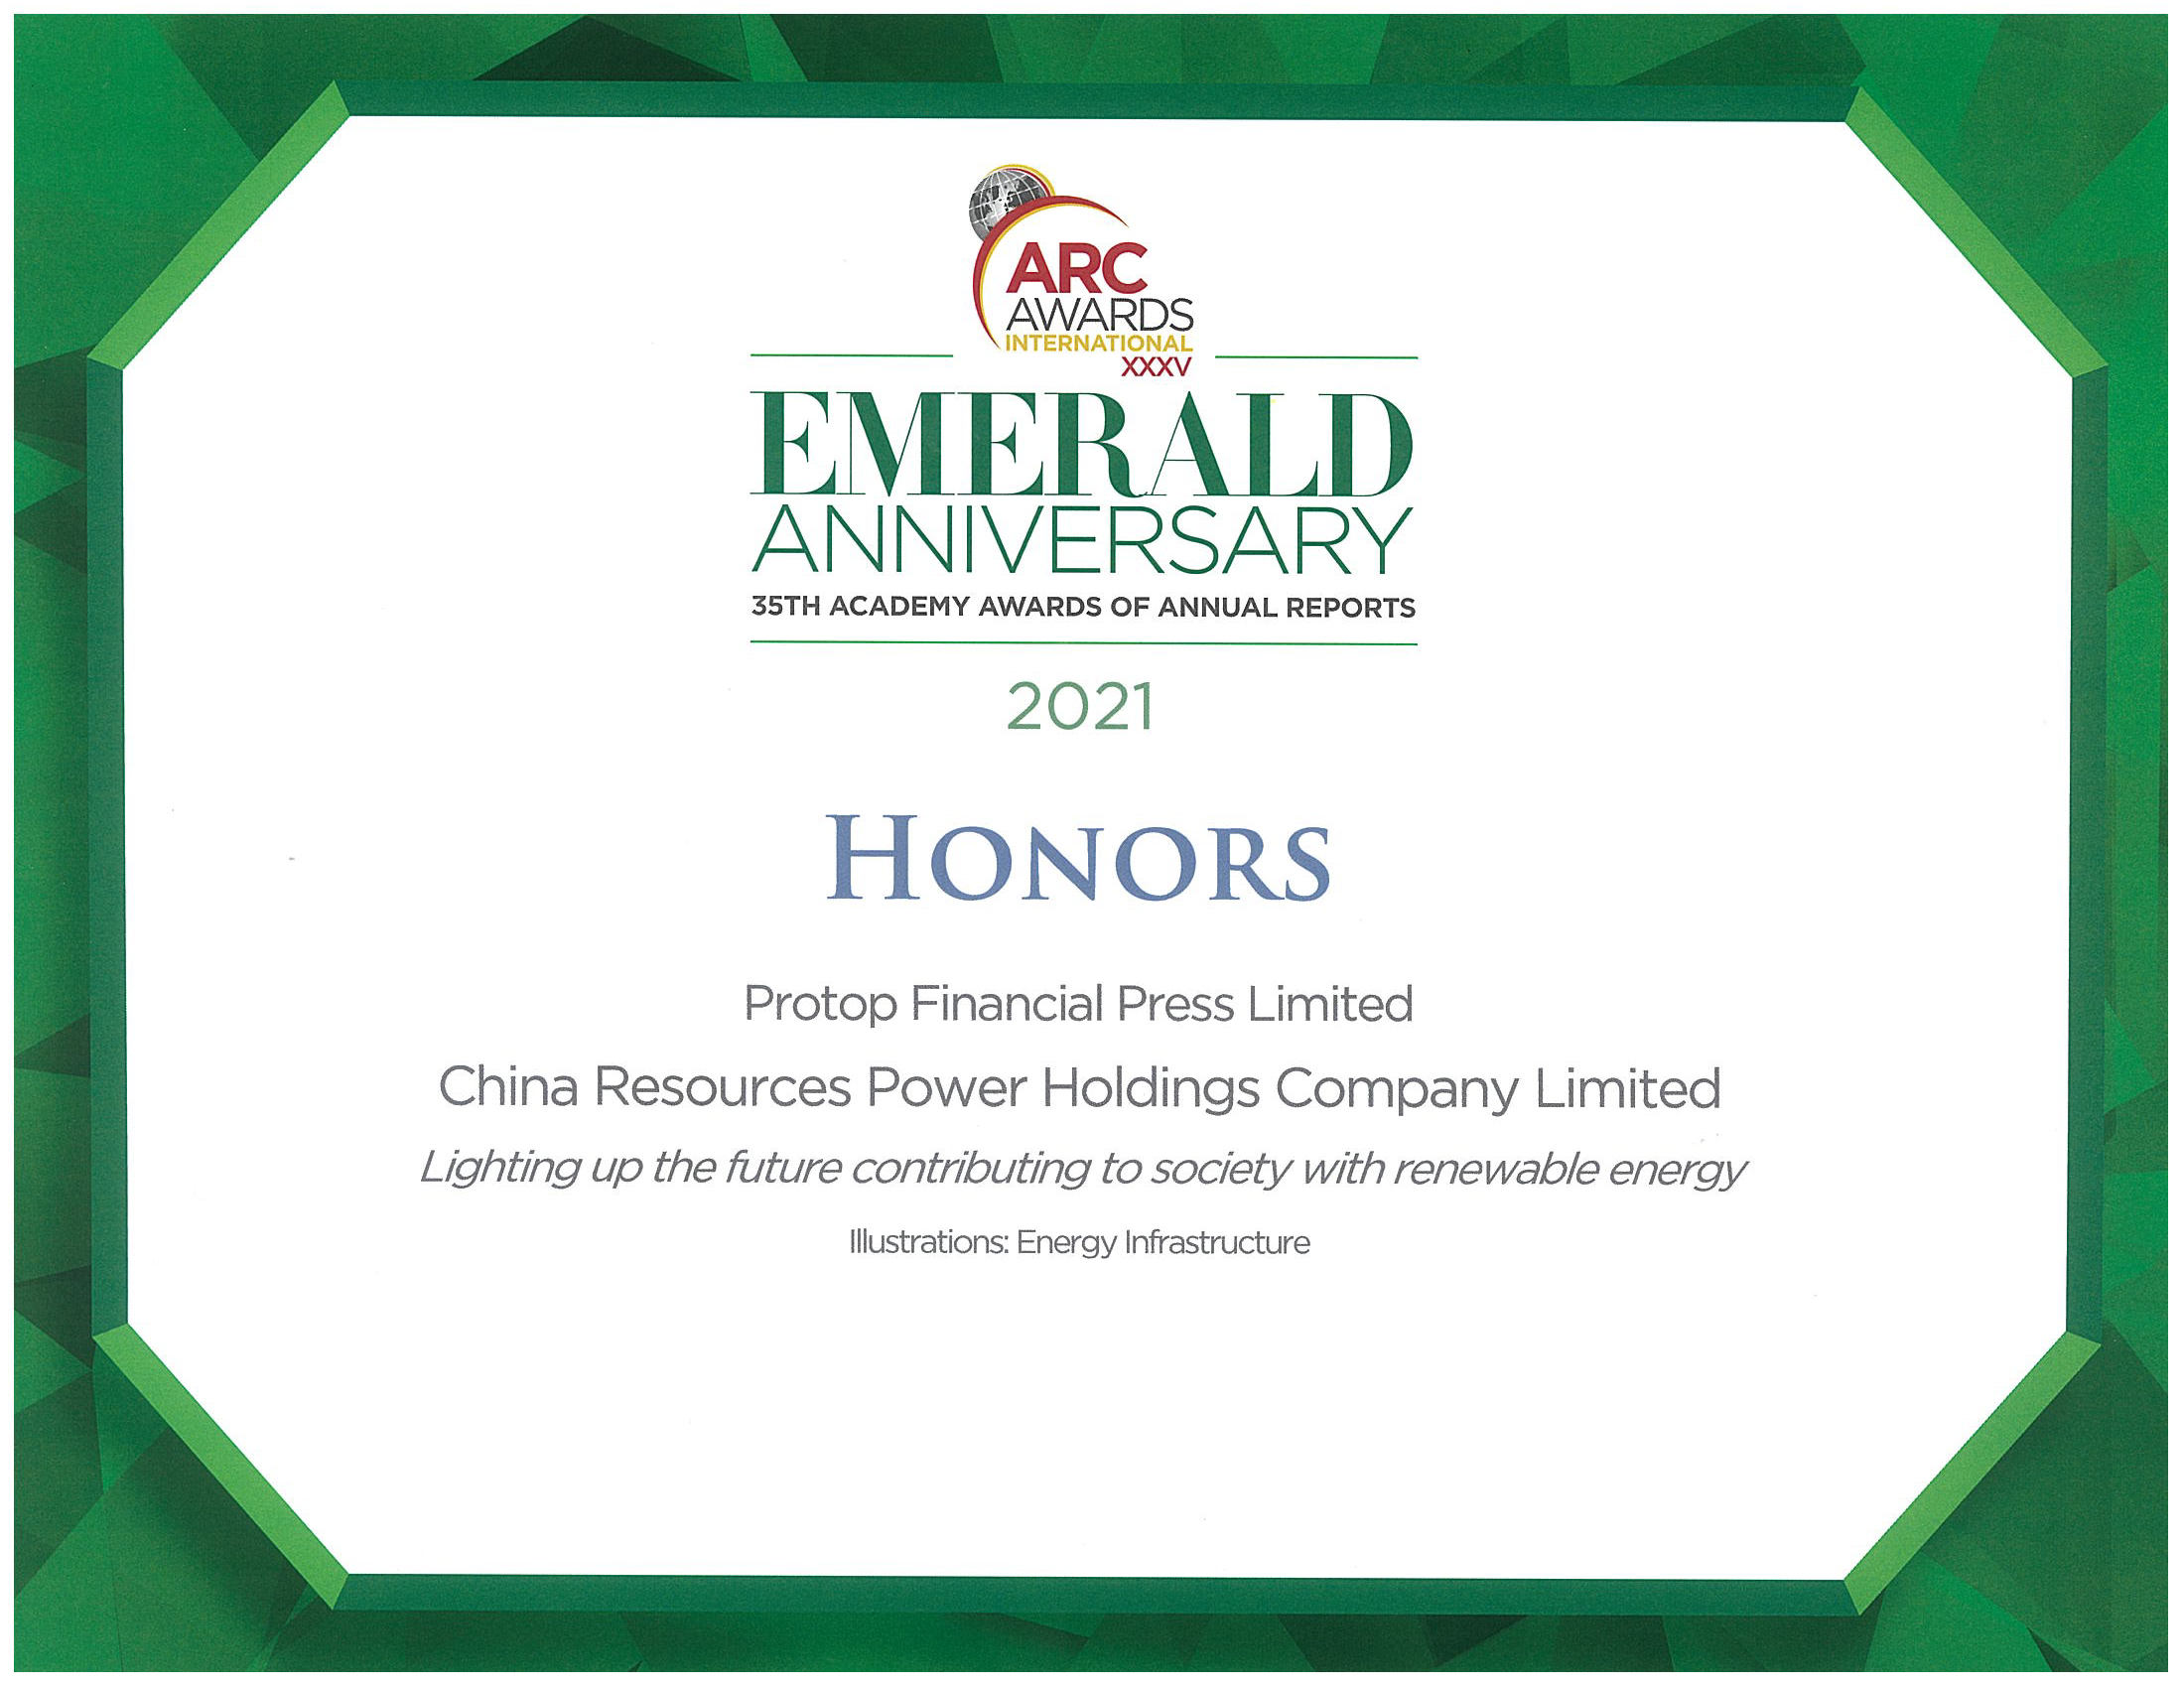 China Resources Power Holdings Company Limited 2021 Award